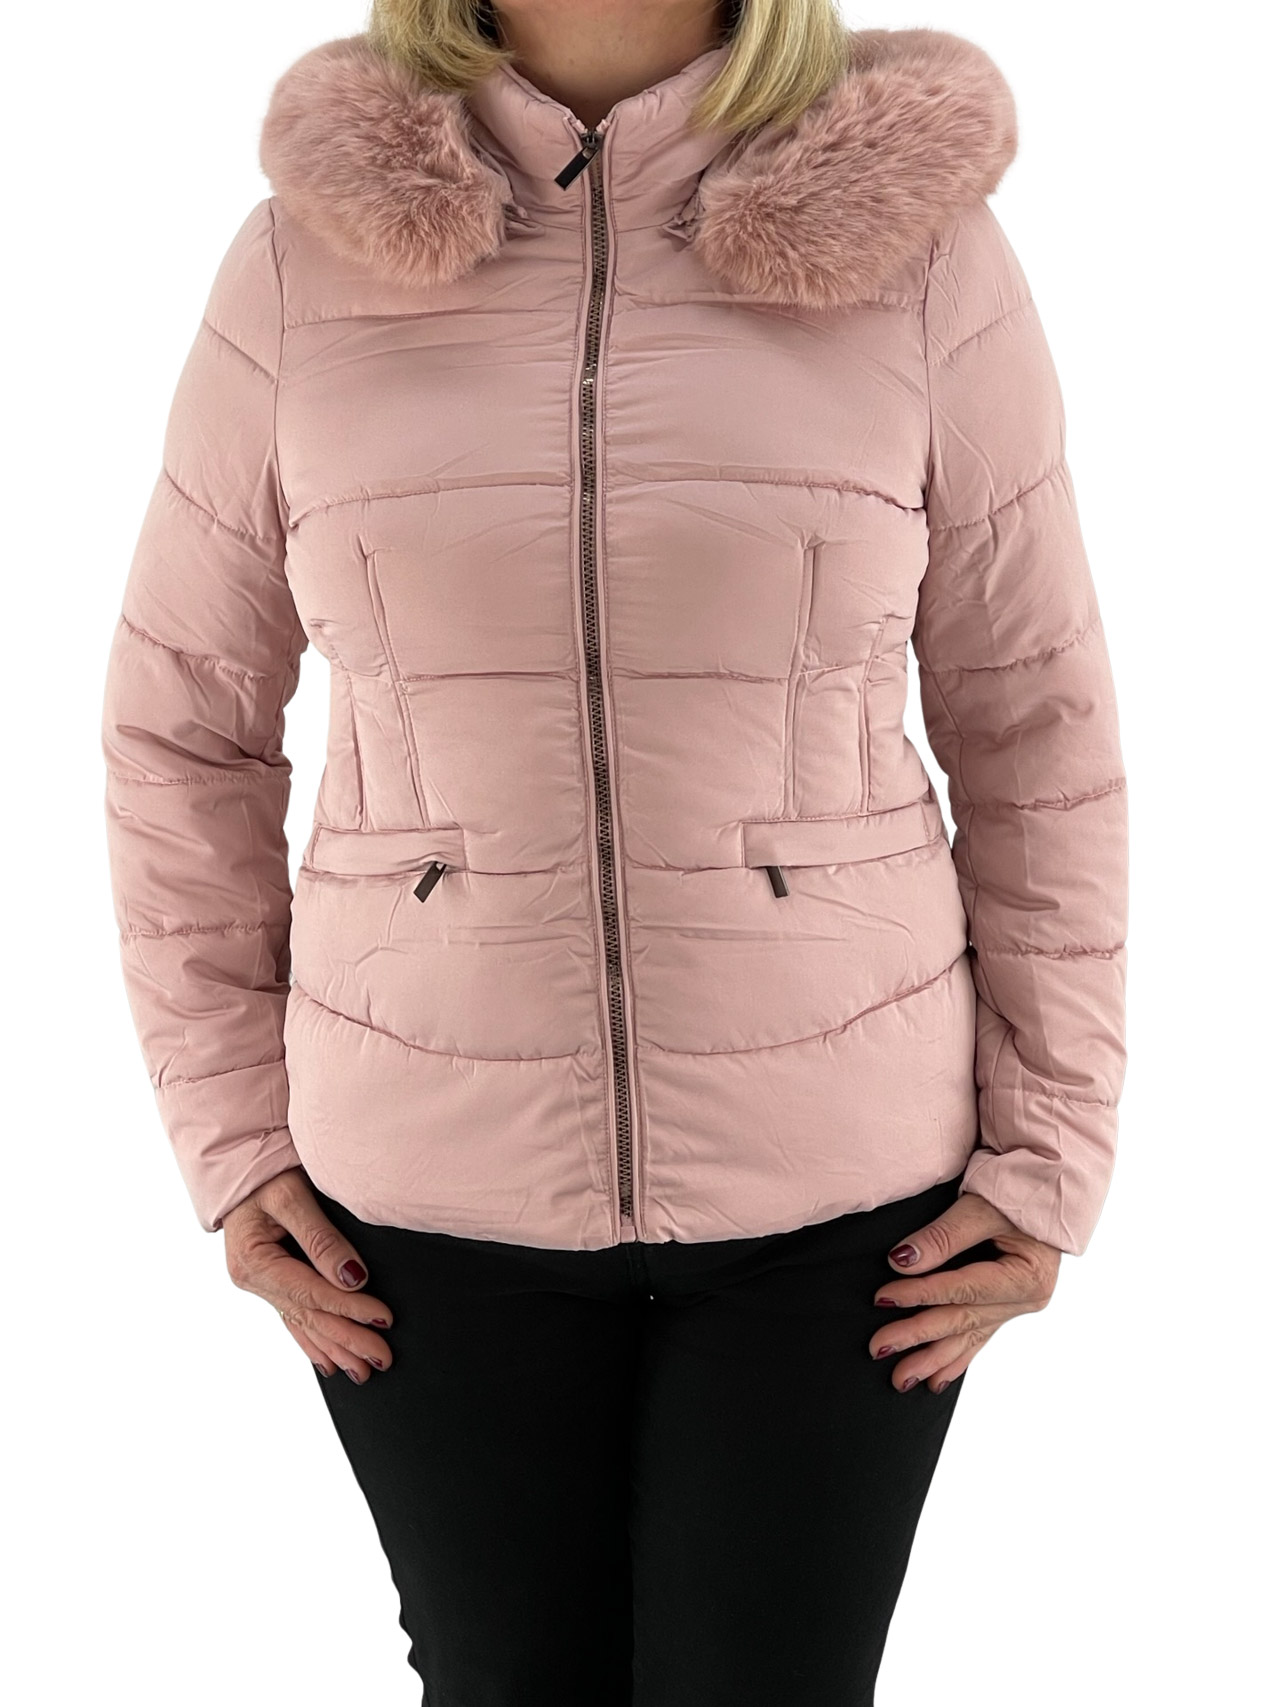 Women's short jacket with fur code A2817